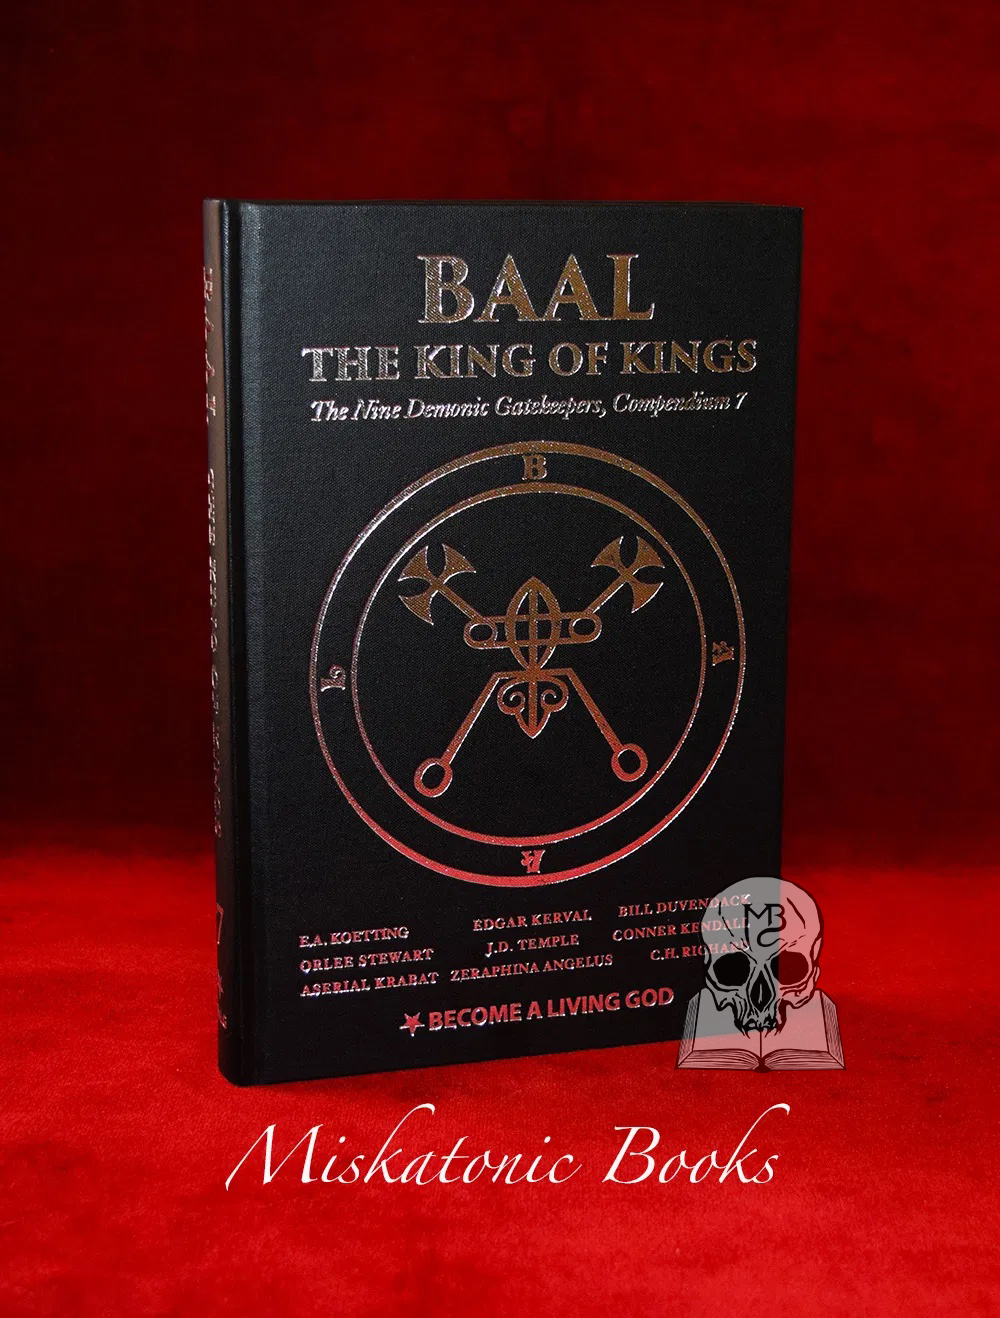 BAAL: The King Of Kings with E.A. Koetting, Edgar Kerval, Bill Duvendack, Orlee Stewart - Hardcover Edition